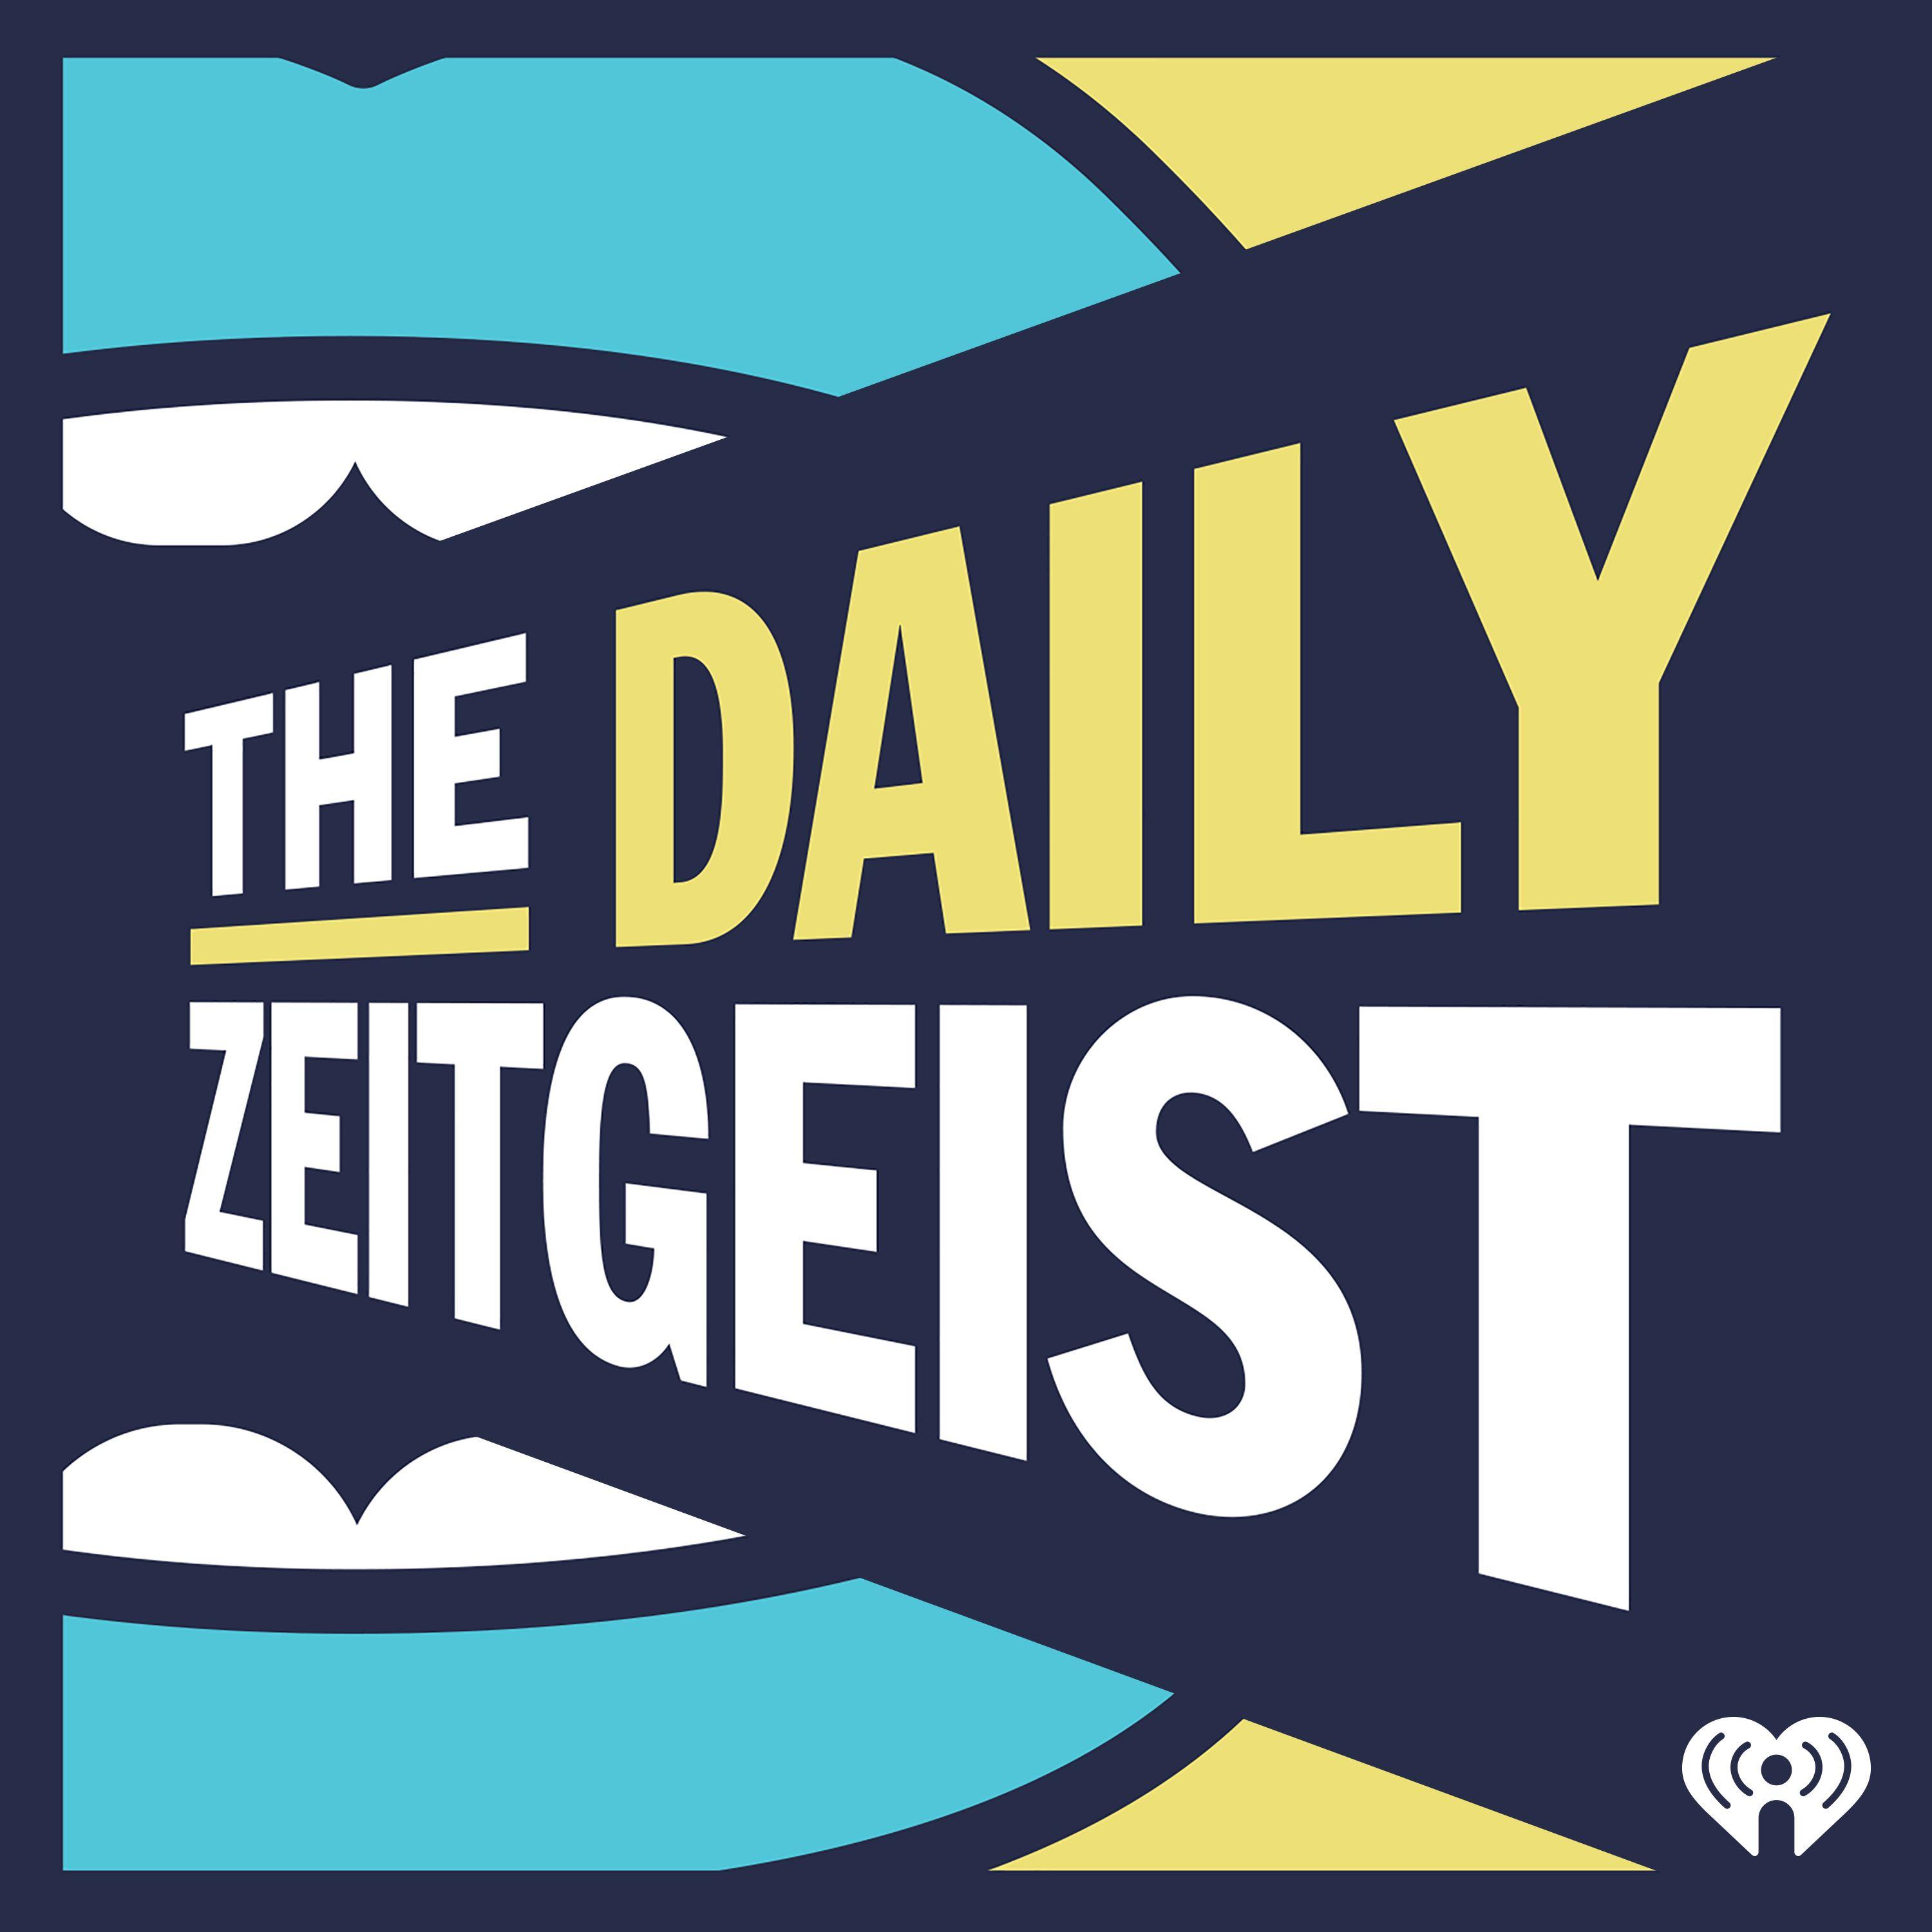 Sue and Diamond Clothing Logo - The Daily Zeitgeist by HowStuffWorks on Apple Podcasts